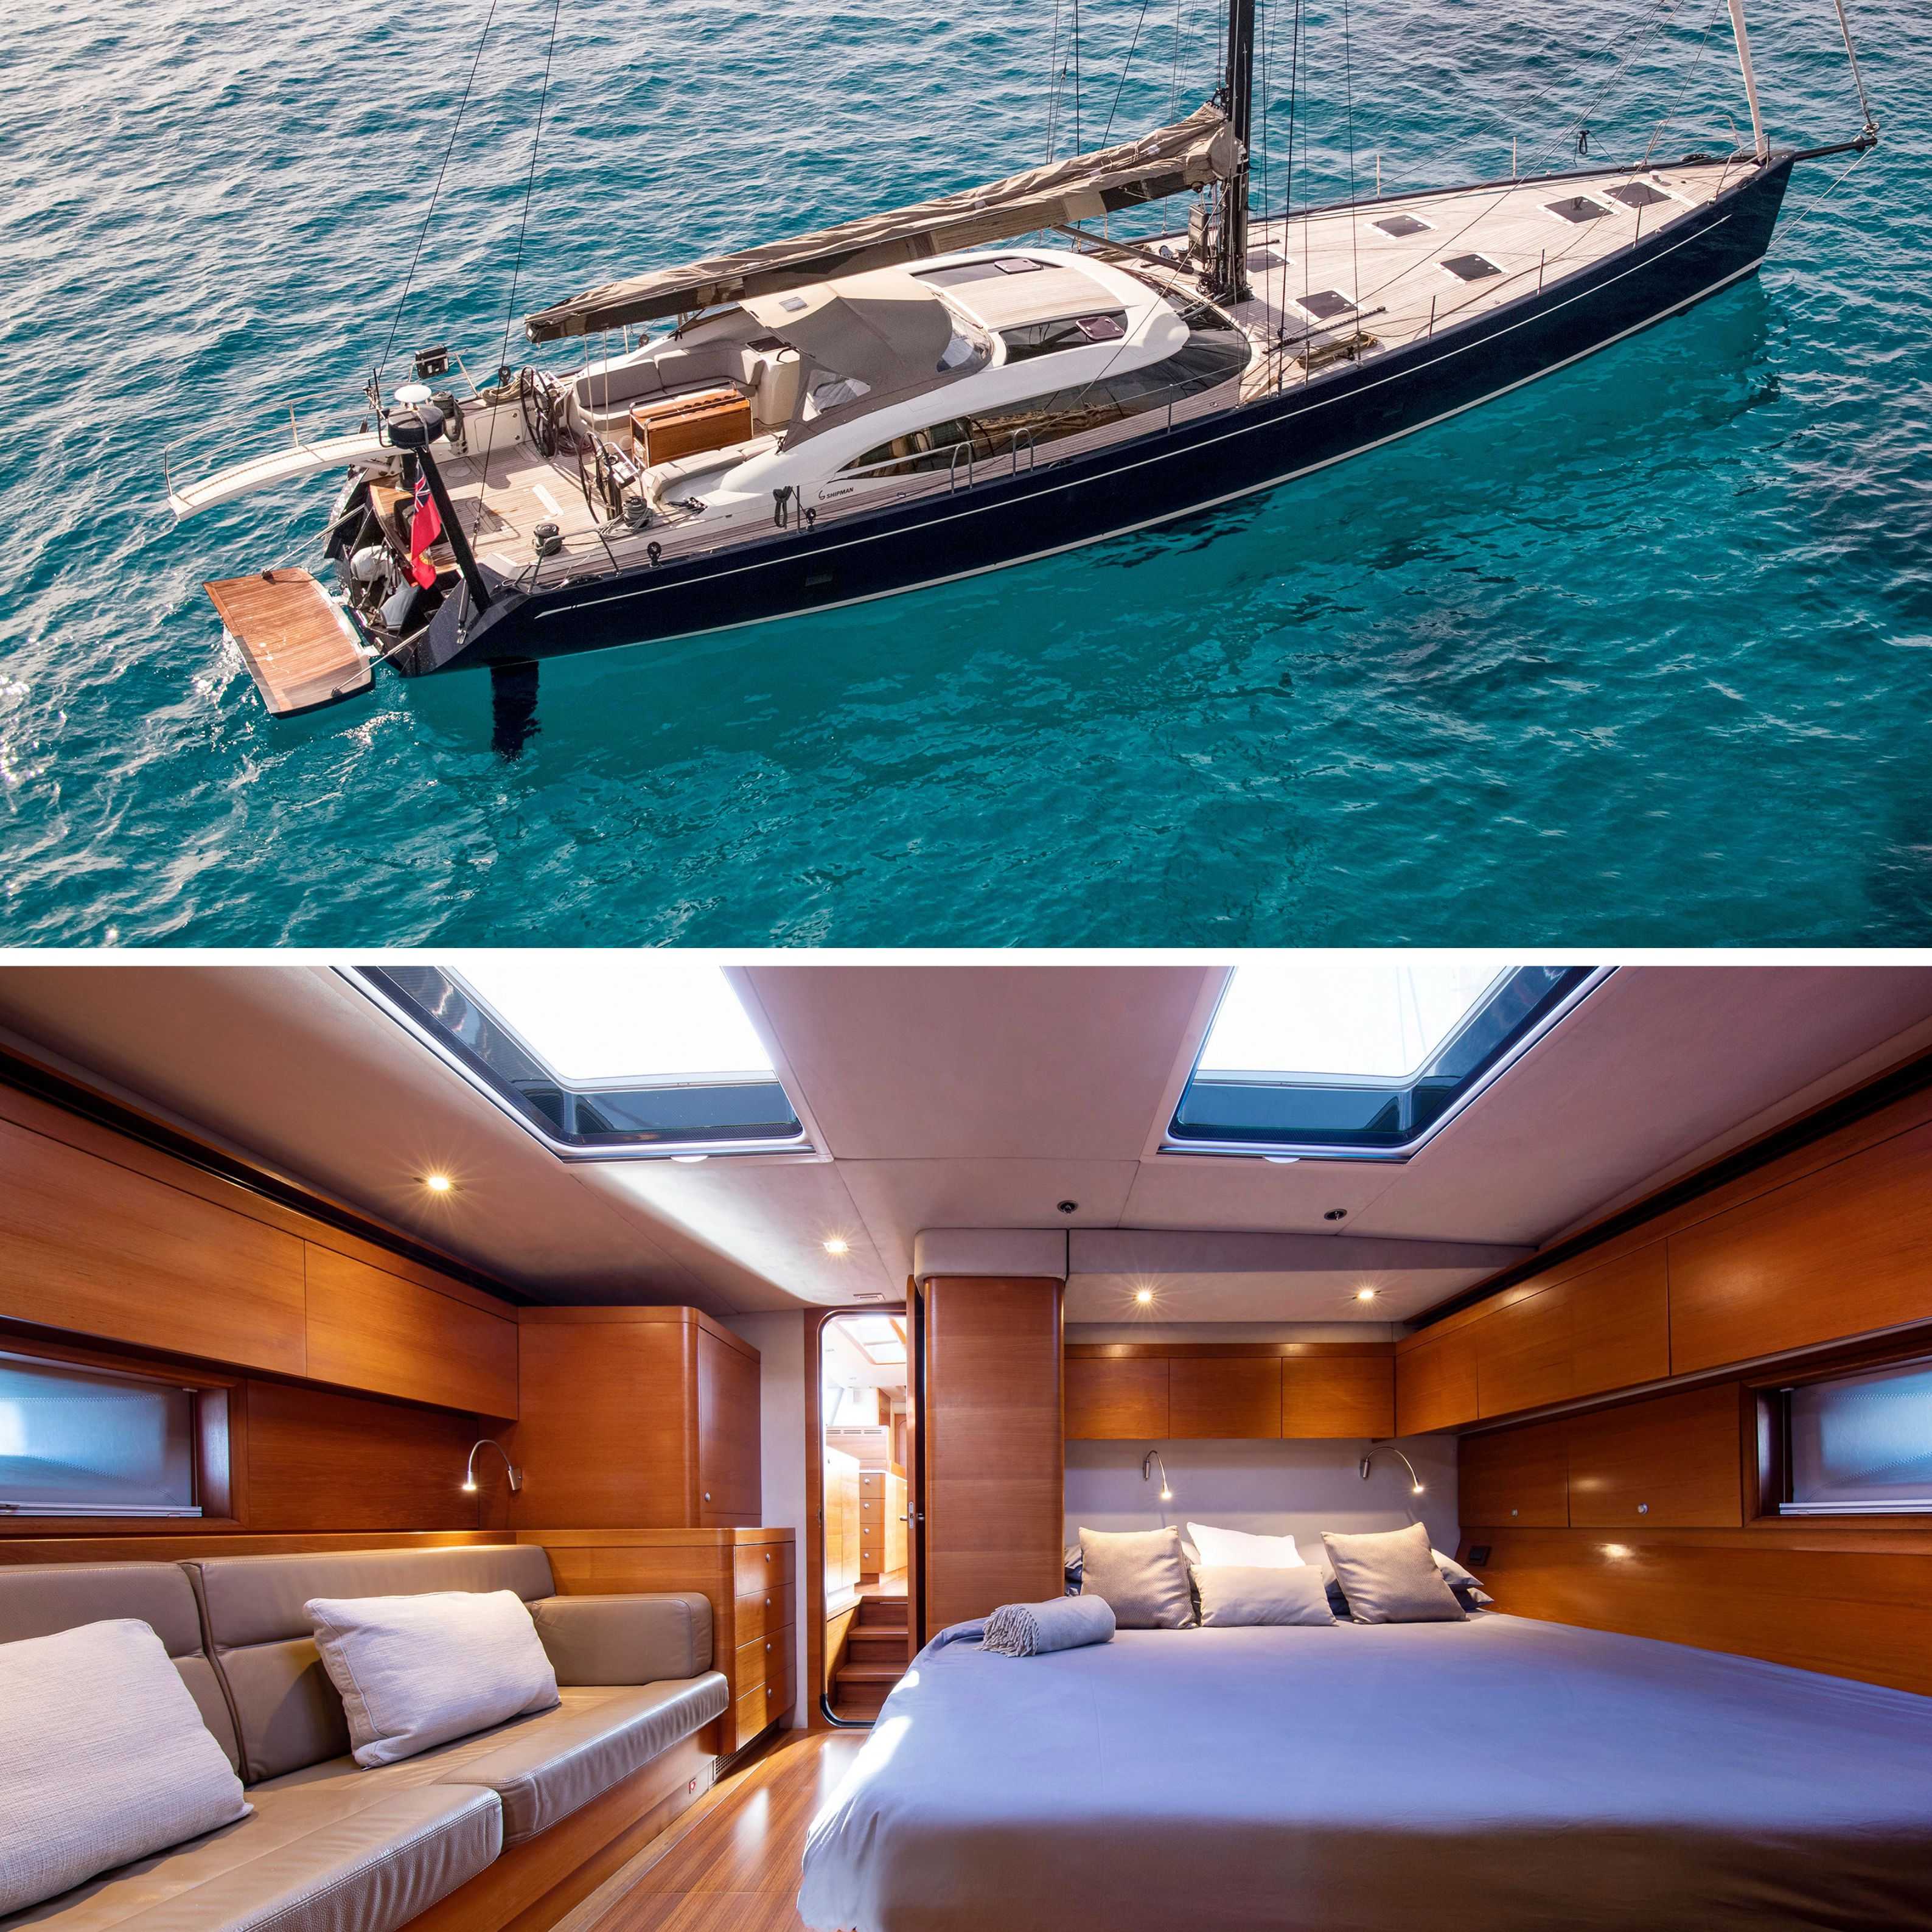 GEOMETRY : New CA Yacht for Sale